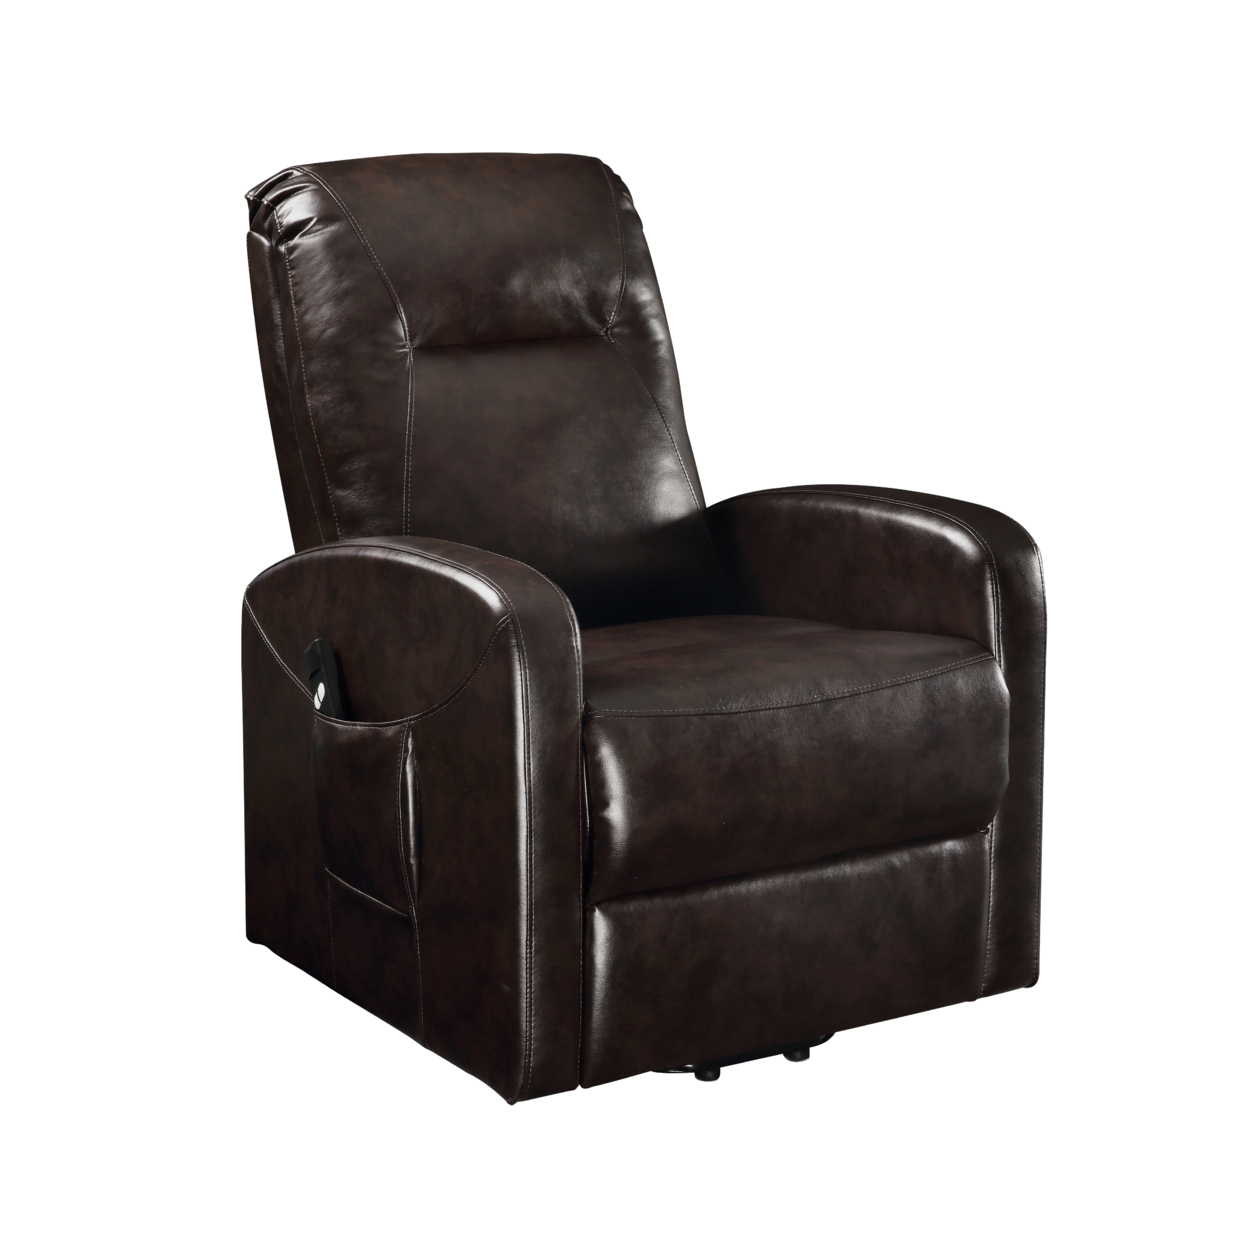 Faux Leather Upholstered Wooden Recliner With Power Lift, Brown- Saltoro Sherpi